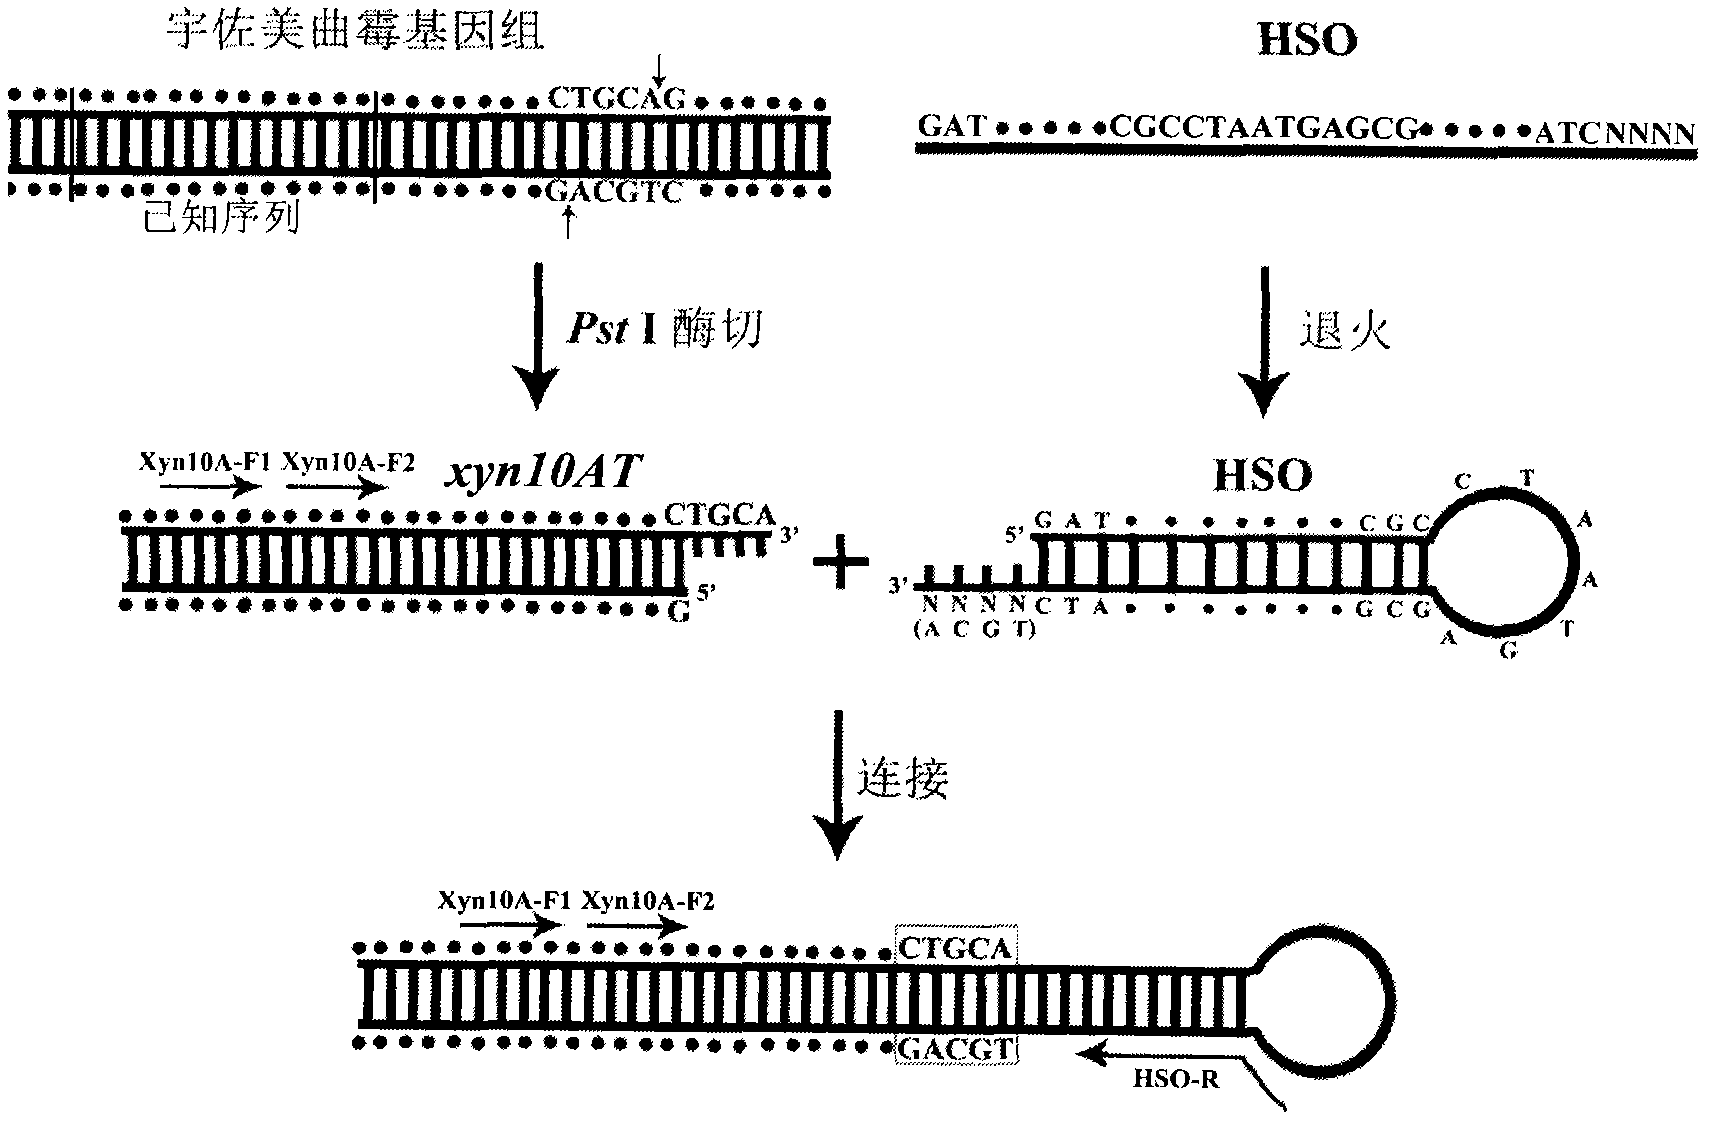 Hairpin structure-mediated method for determining unknown sequence of 3'-end flanking region